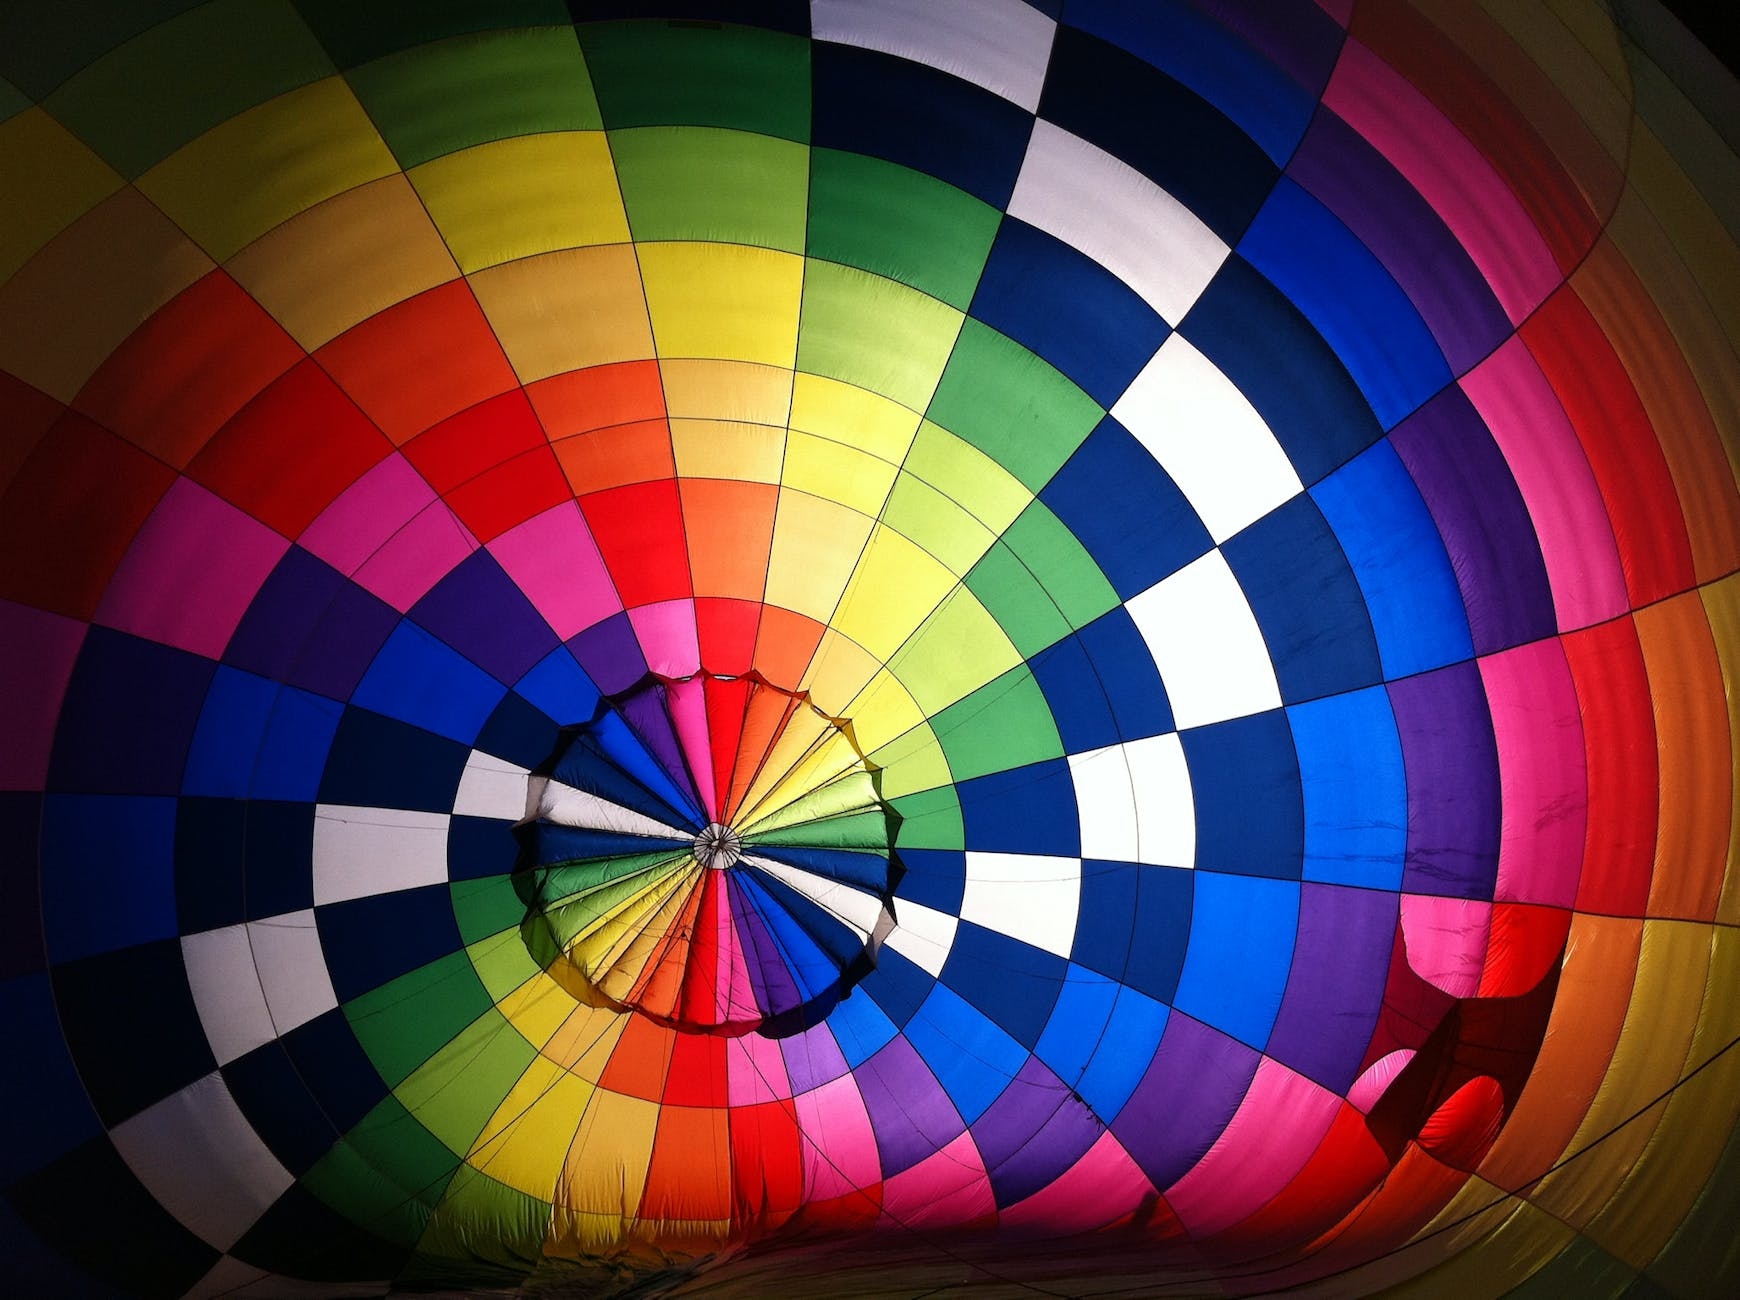 The top of a colorful hot air balloon